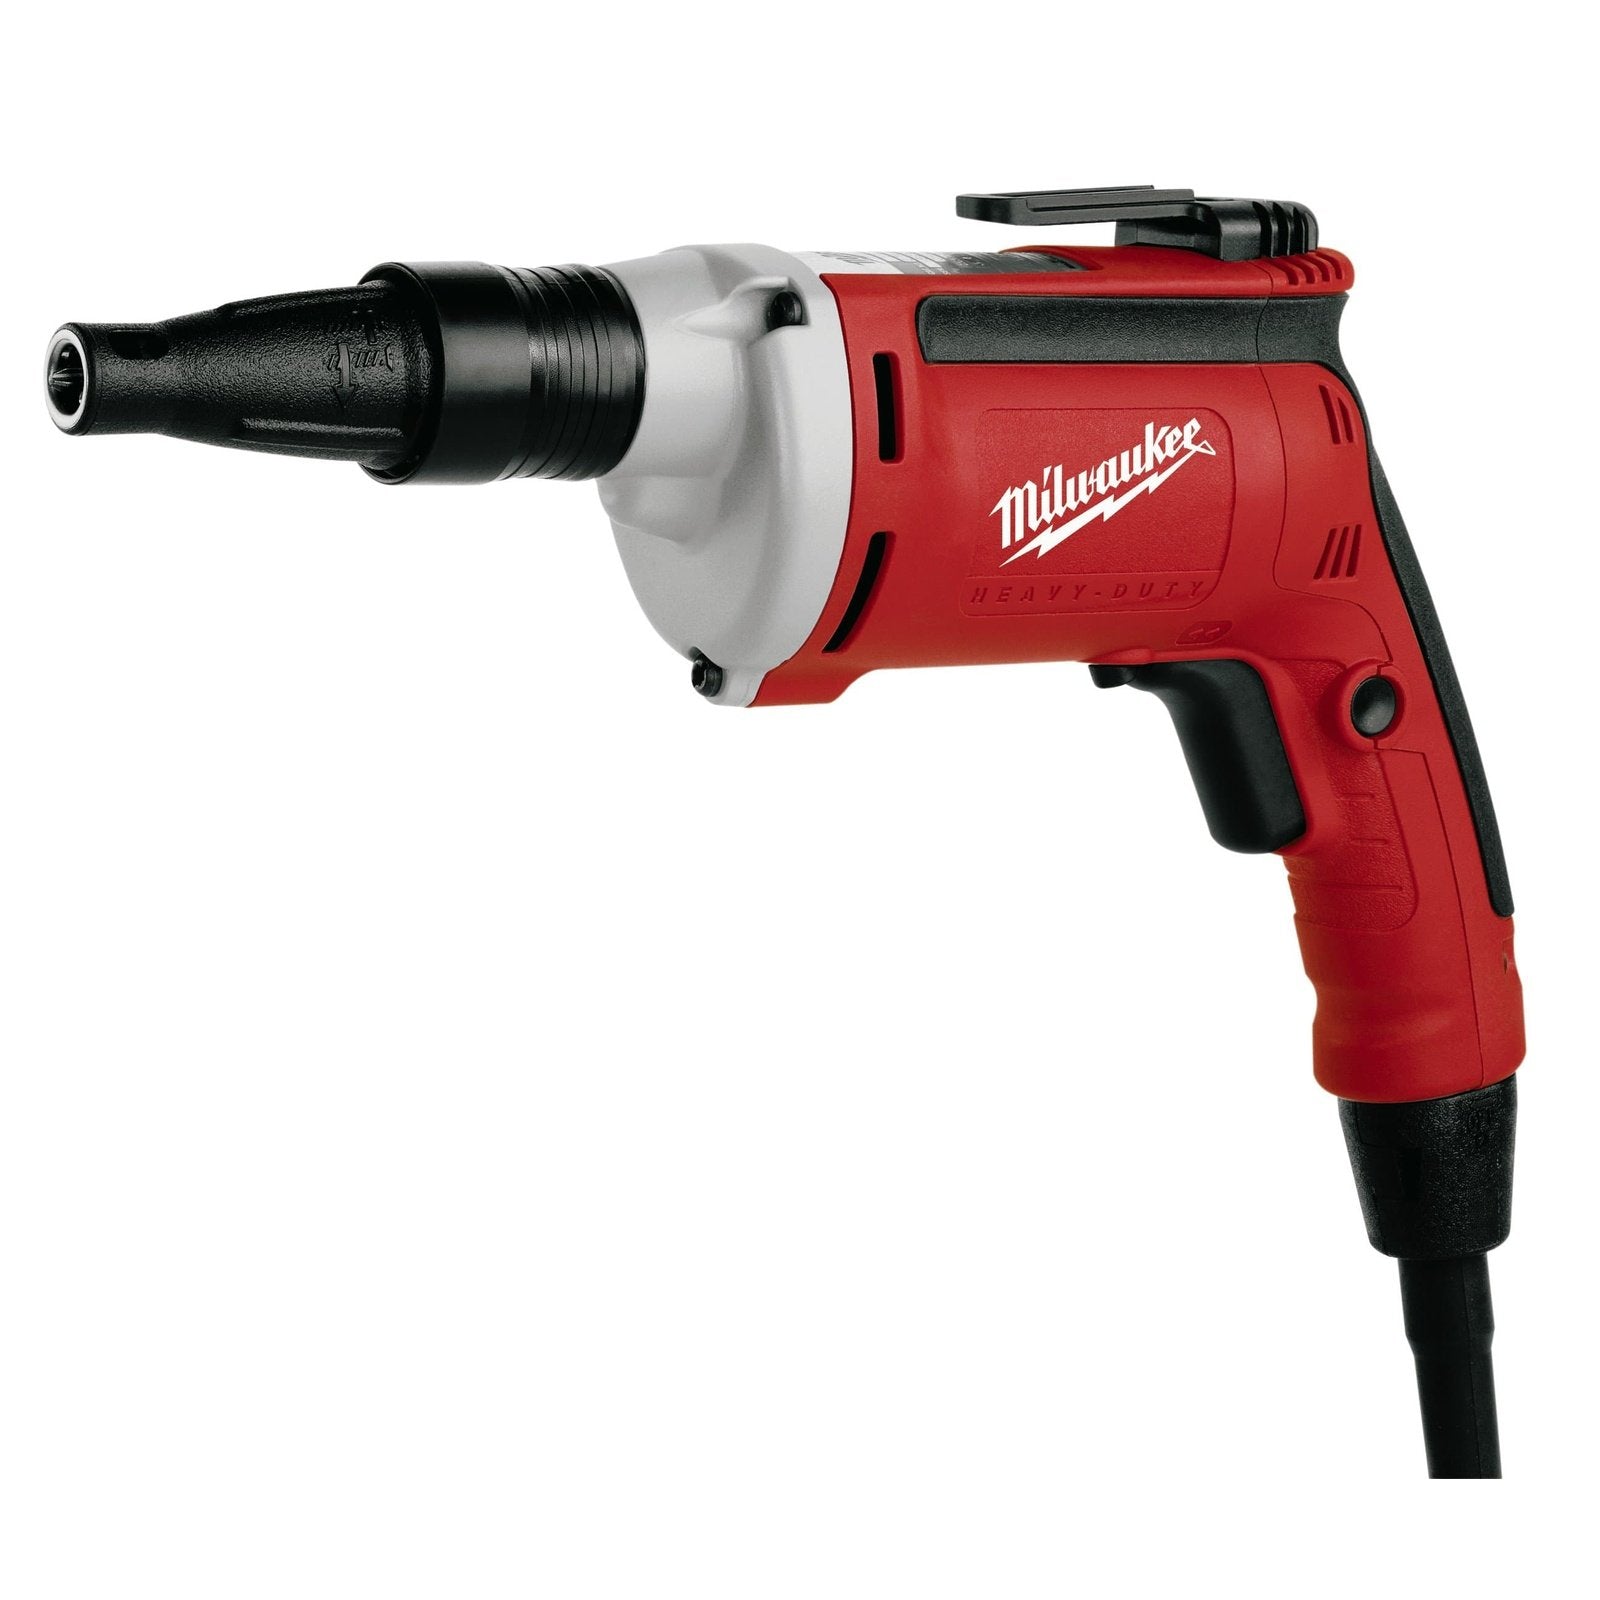 Milwaukee Drywall Screwdriver 725W - DWSE 4000 Q | Supply Master | Accra, Ghana Tools Building Steel Engineering Hardware tool